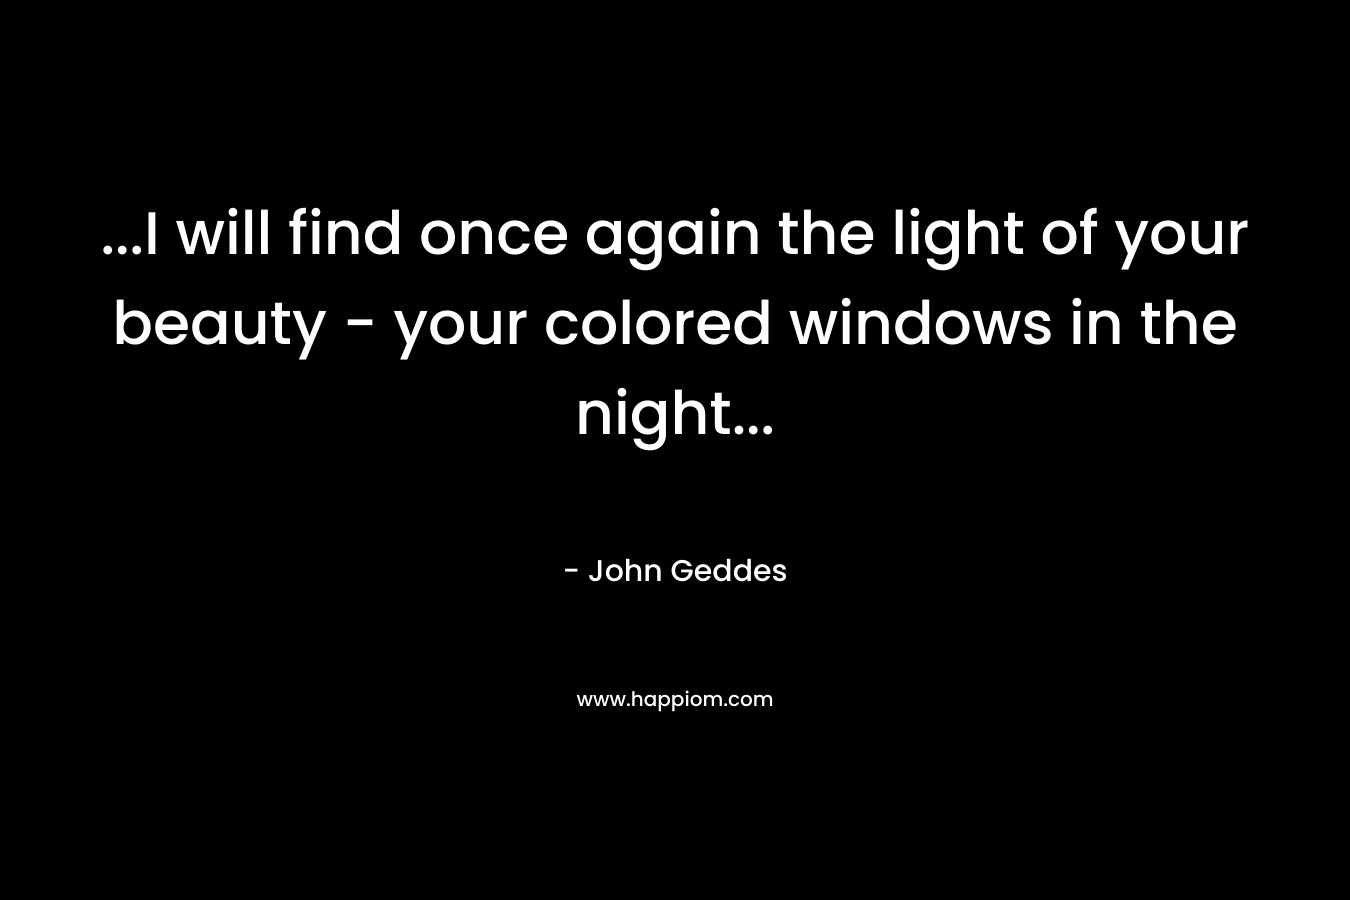 …I will find once again the light of your beauty – your colored windows in the night… – John Geddes